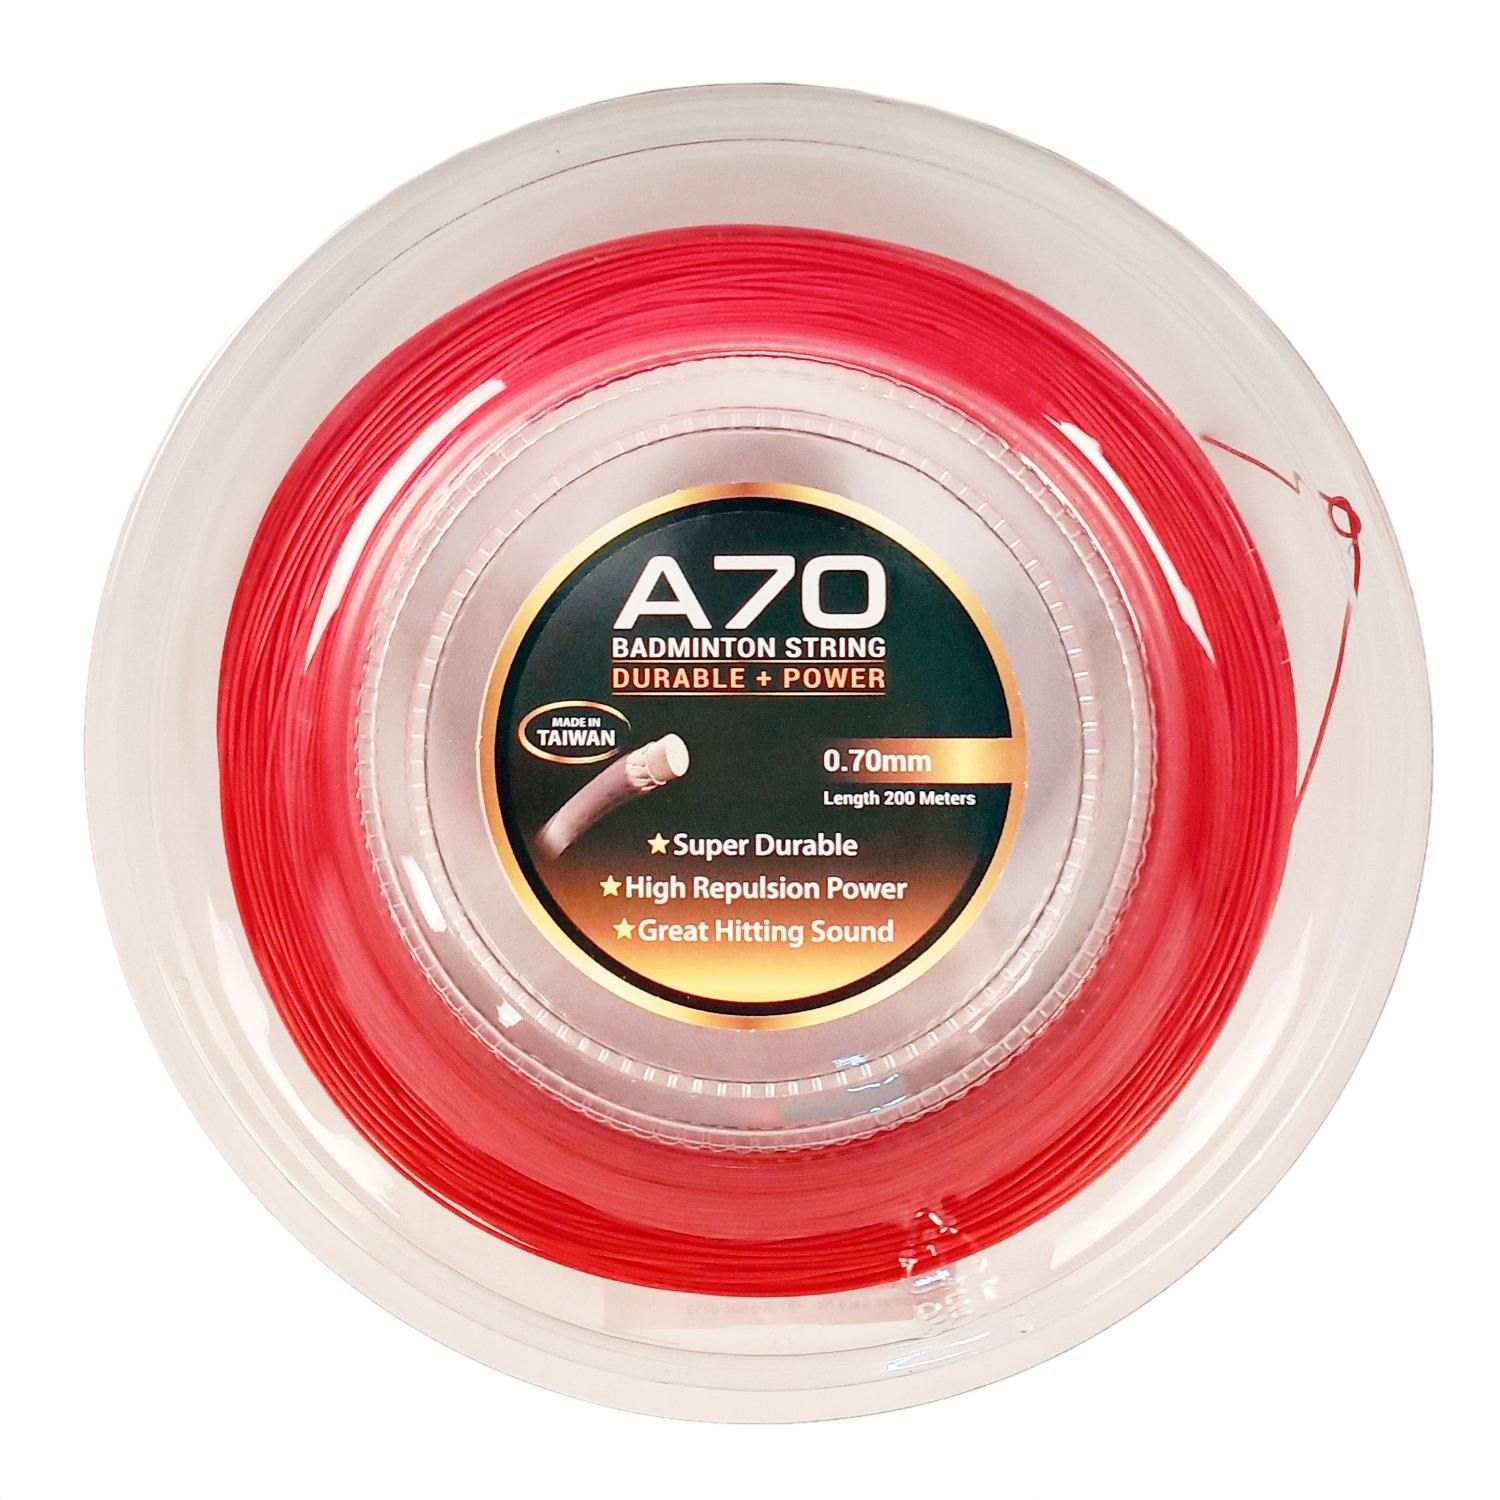 Li-Ning A 70 Badminton 200 Mtrs String Roll, Red (Made in Taiwan) - Best Price online Prokicksports.com